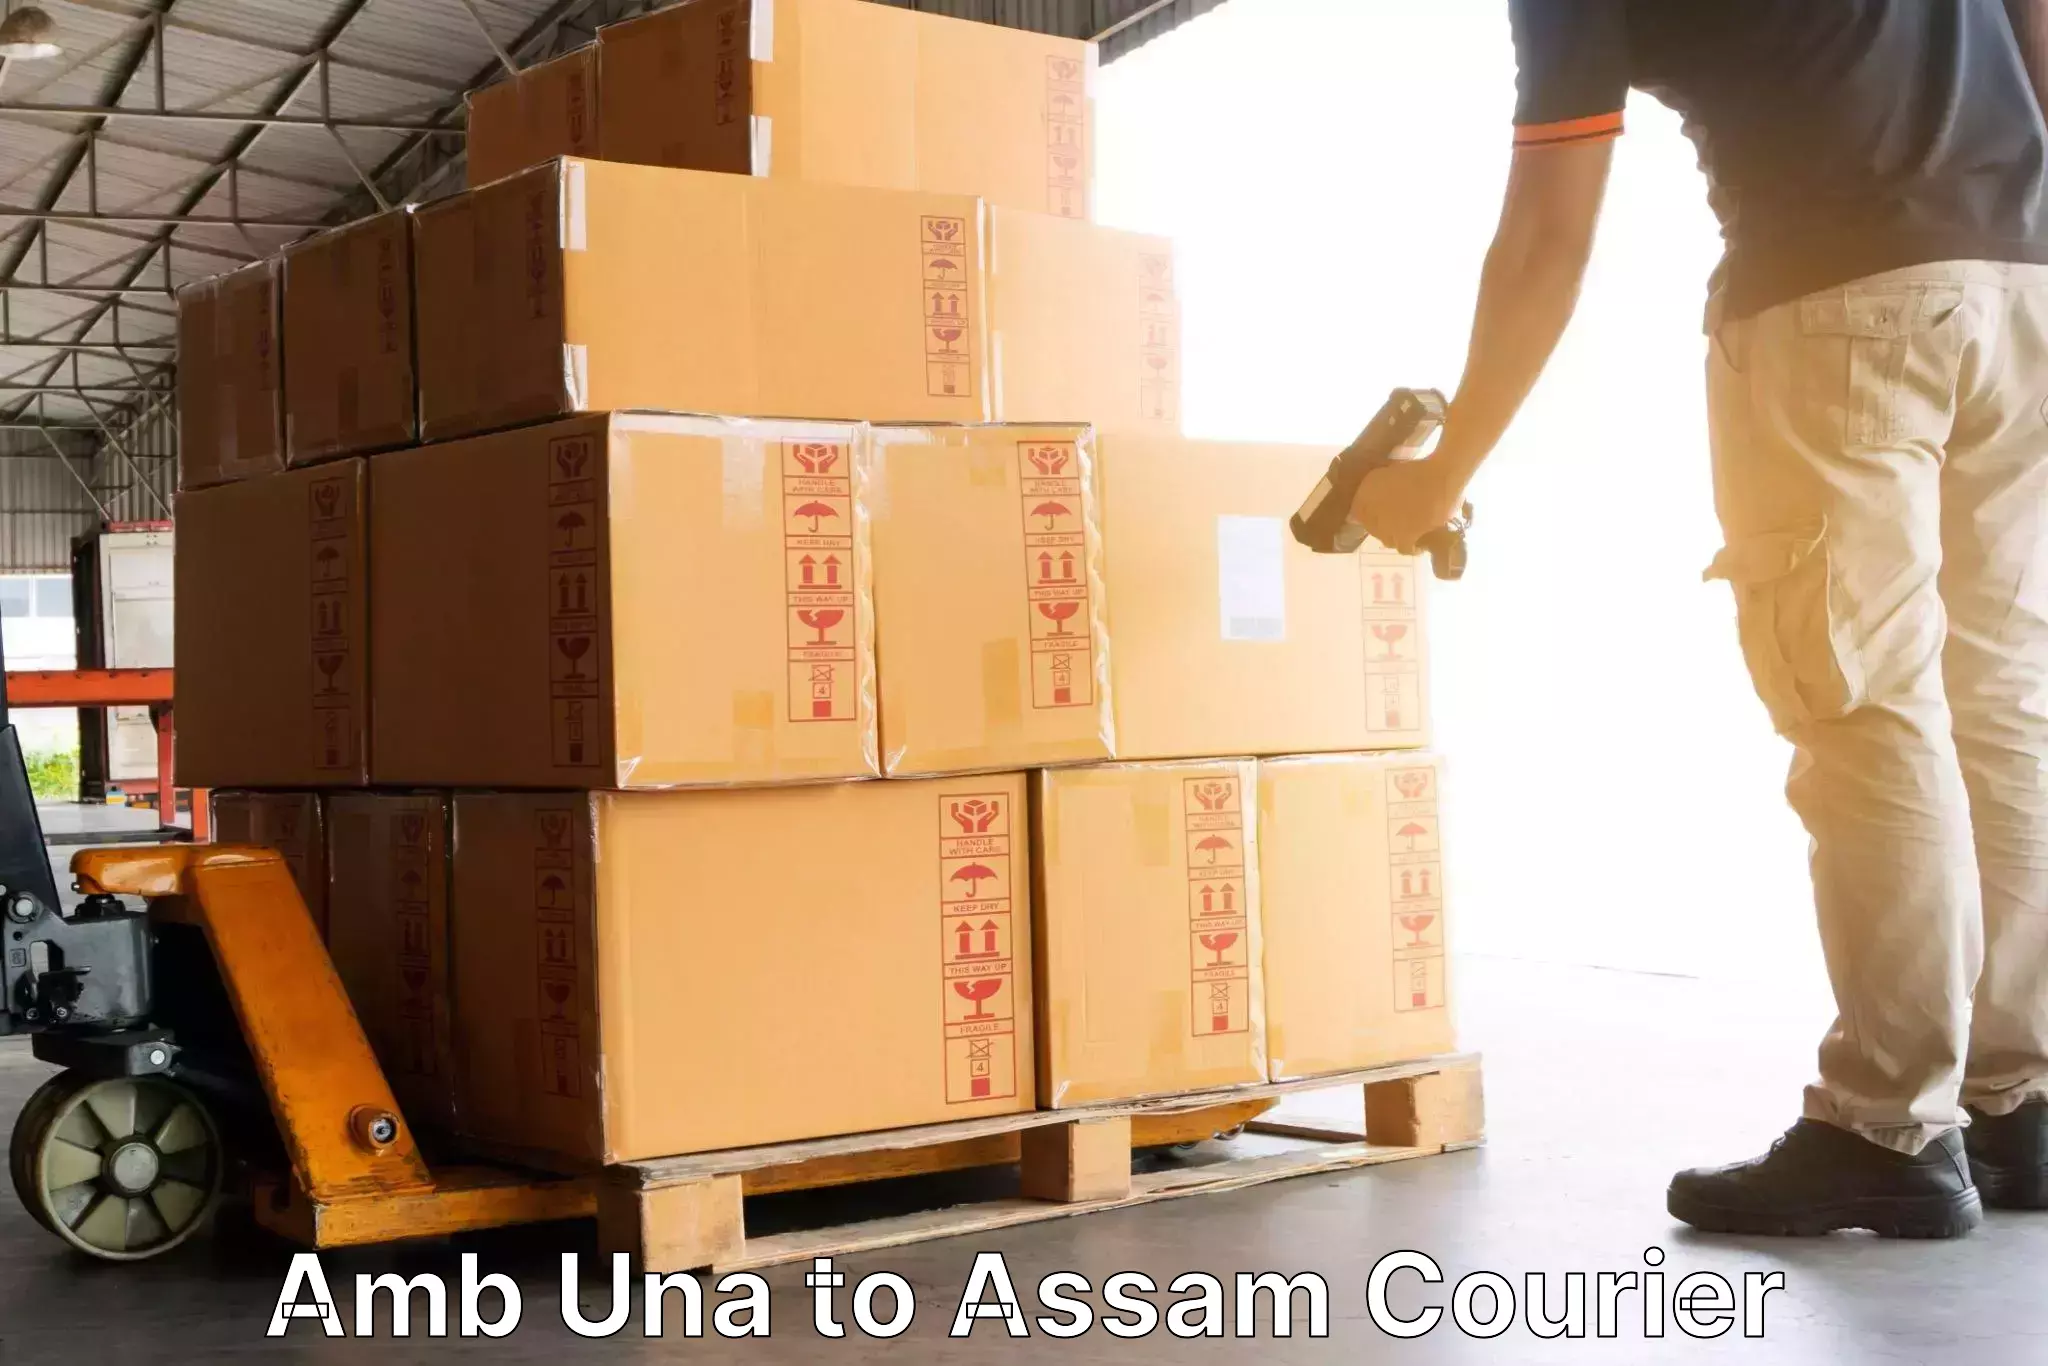 Courier service partnerships Amb Una to Lakhipur